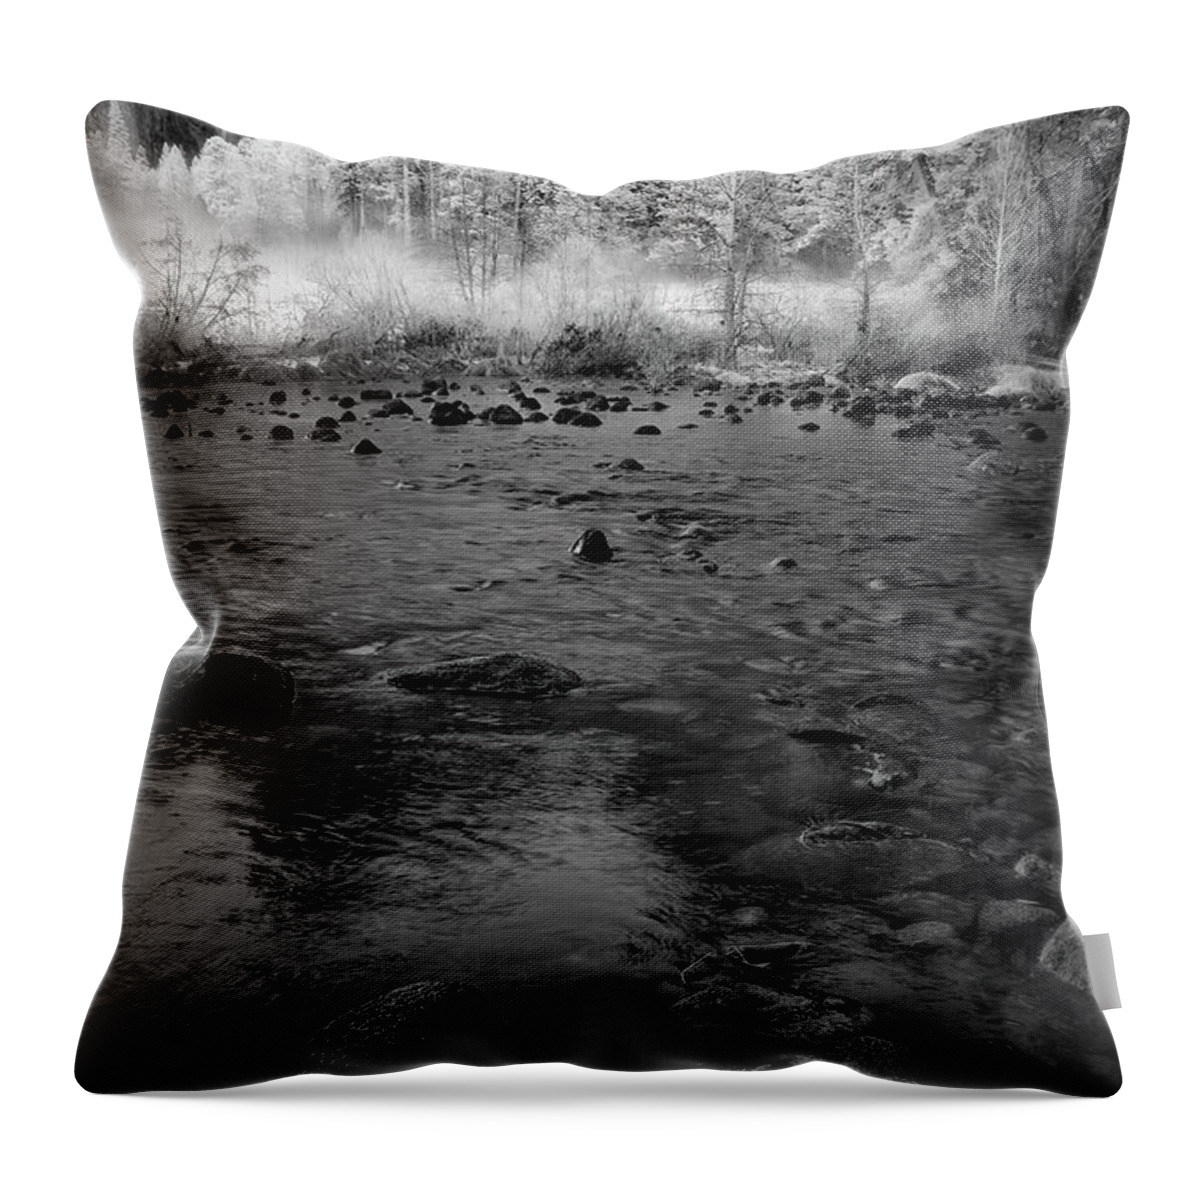 Yosemite Throw Pillow featuring the photograph Yosemite River in BW by Jon Glaser